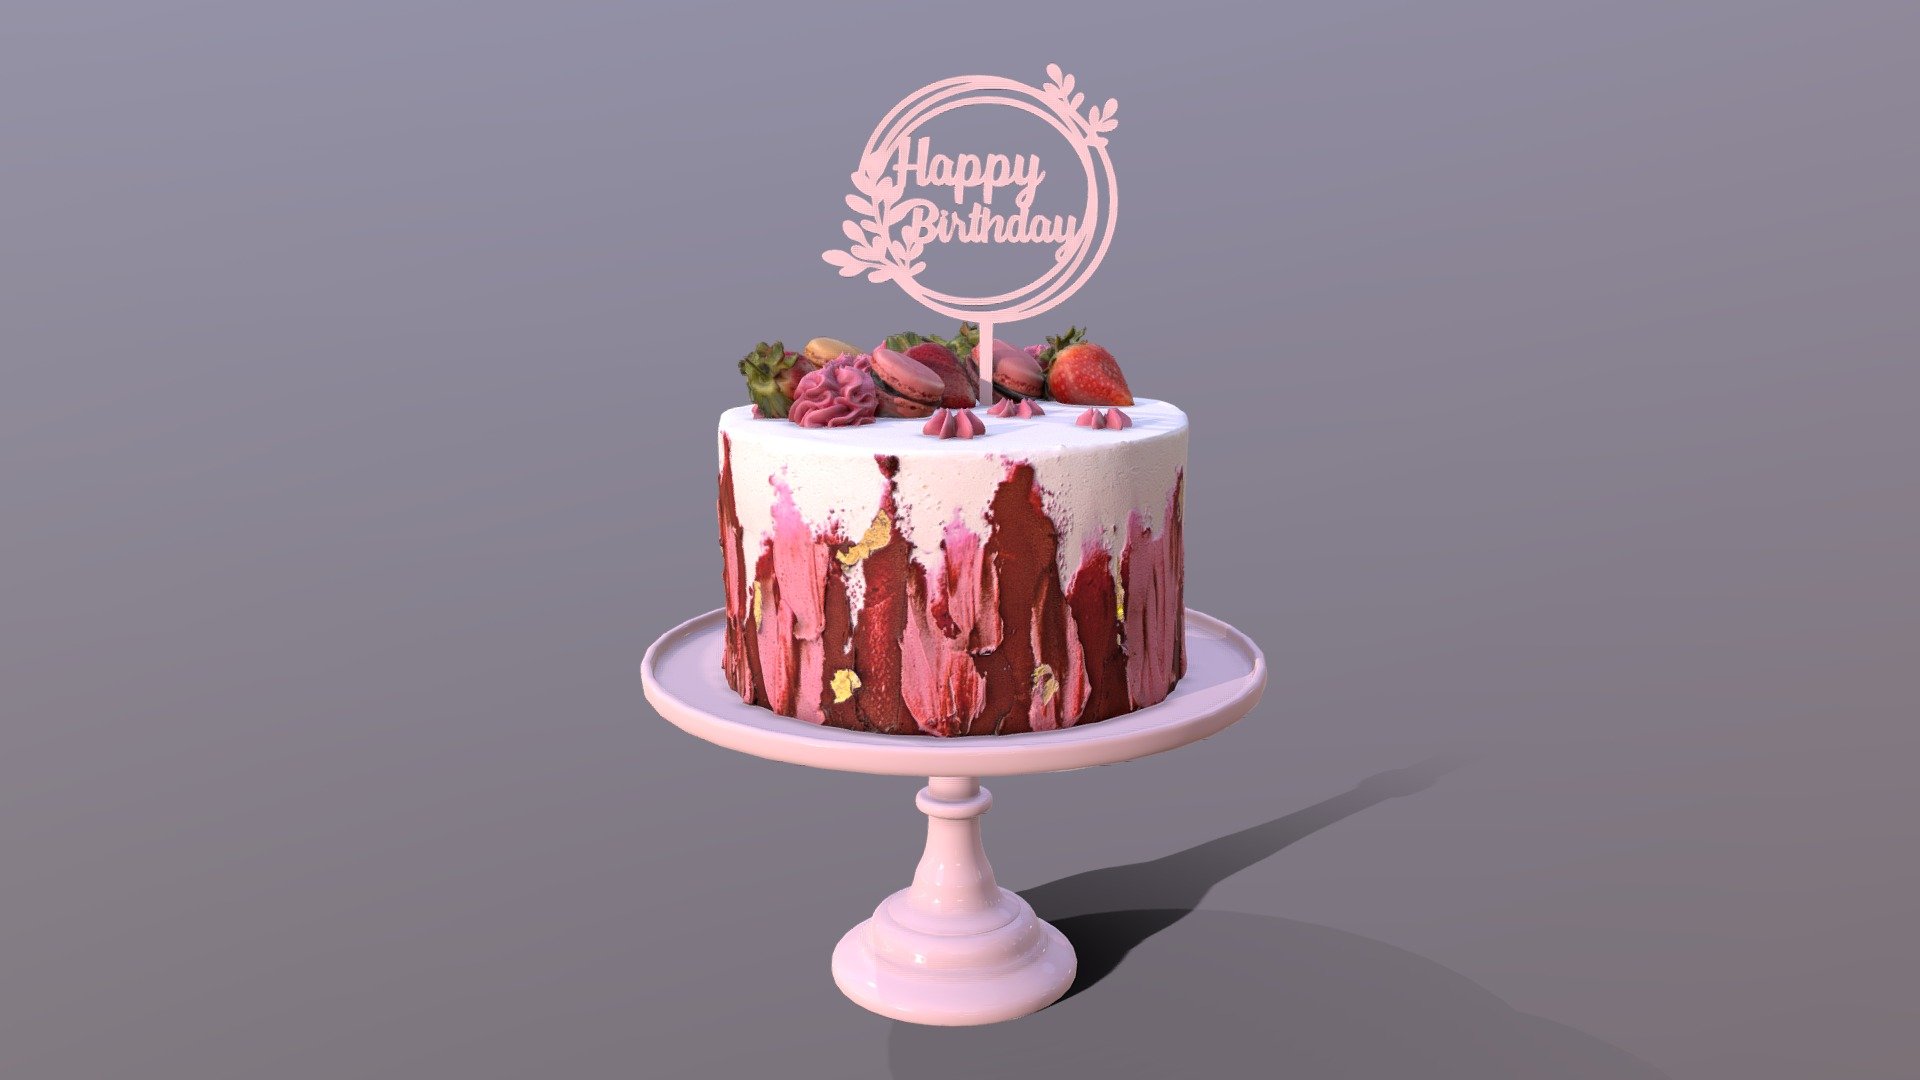 3D scan of an elegant Strawberry Swirl Birthday Cake on the Mosser glass stand which is made by CAKESBURG Online Premium Cake Shop in UK. You can also order real cake from this link: https://cakesburg.co.uk/products/elegant-hibiscus-buttercream-cake?_pos=1&amp;_sid=7620101b1&amp;_ss=r

Textures 2X 4096*4096px PBR photoscan-based materials Base Color, Normal, Roughness, Specular, AO) - Elegant Strawberry Swirl Birthday Cake - Buy Royalty Free 3D model by Cakesburg Premium 3D Cake Shop (@Viscom_Cakesburg) 3d model